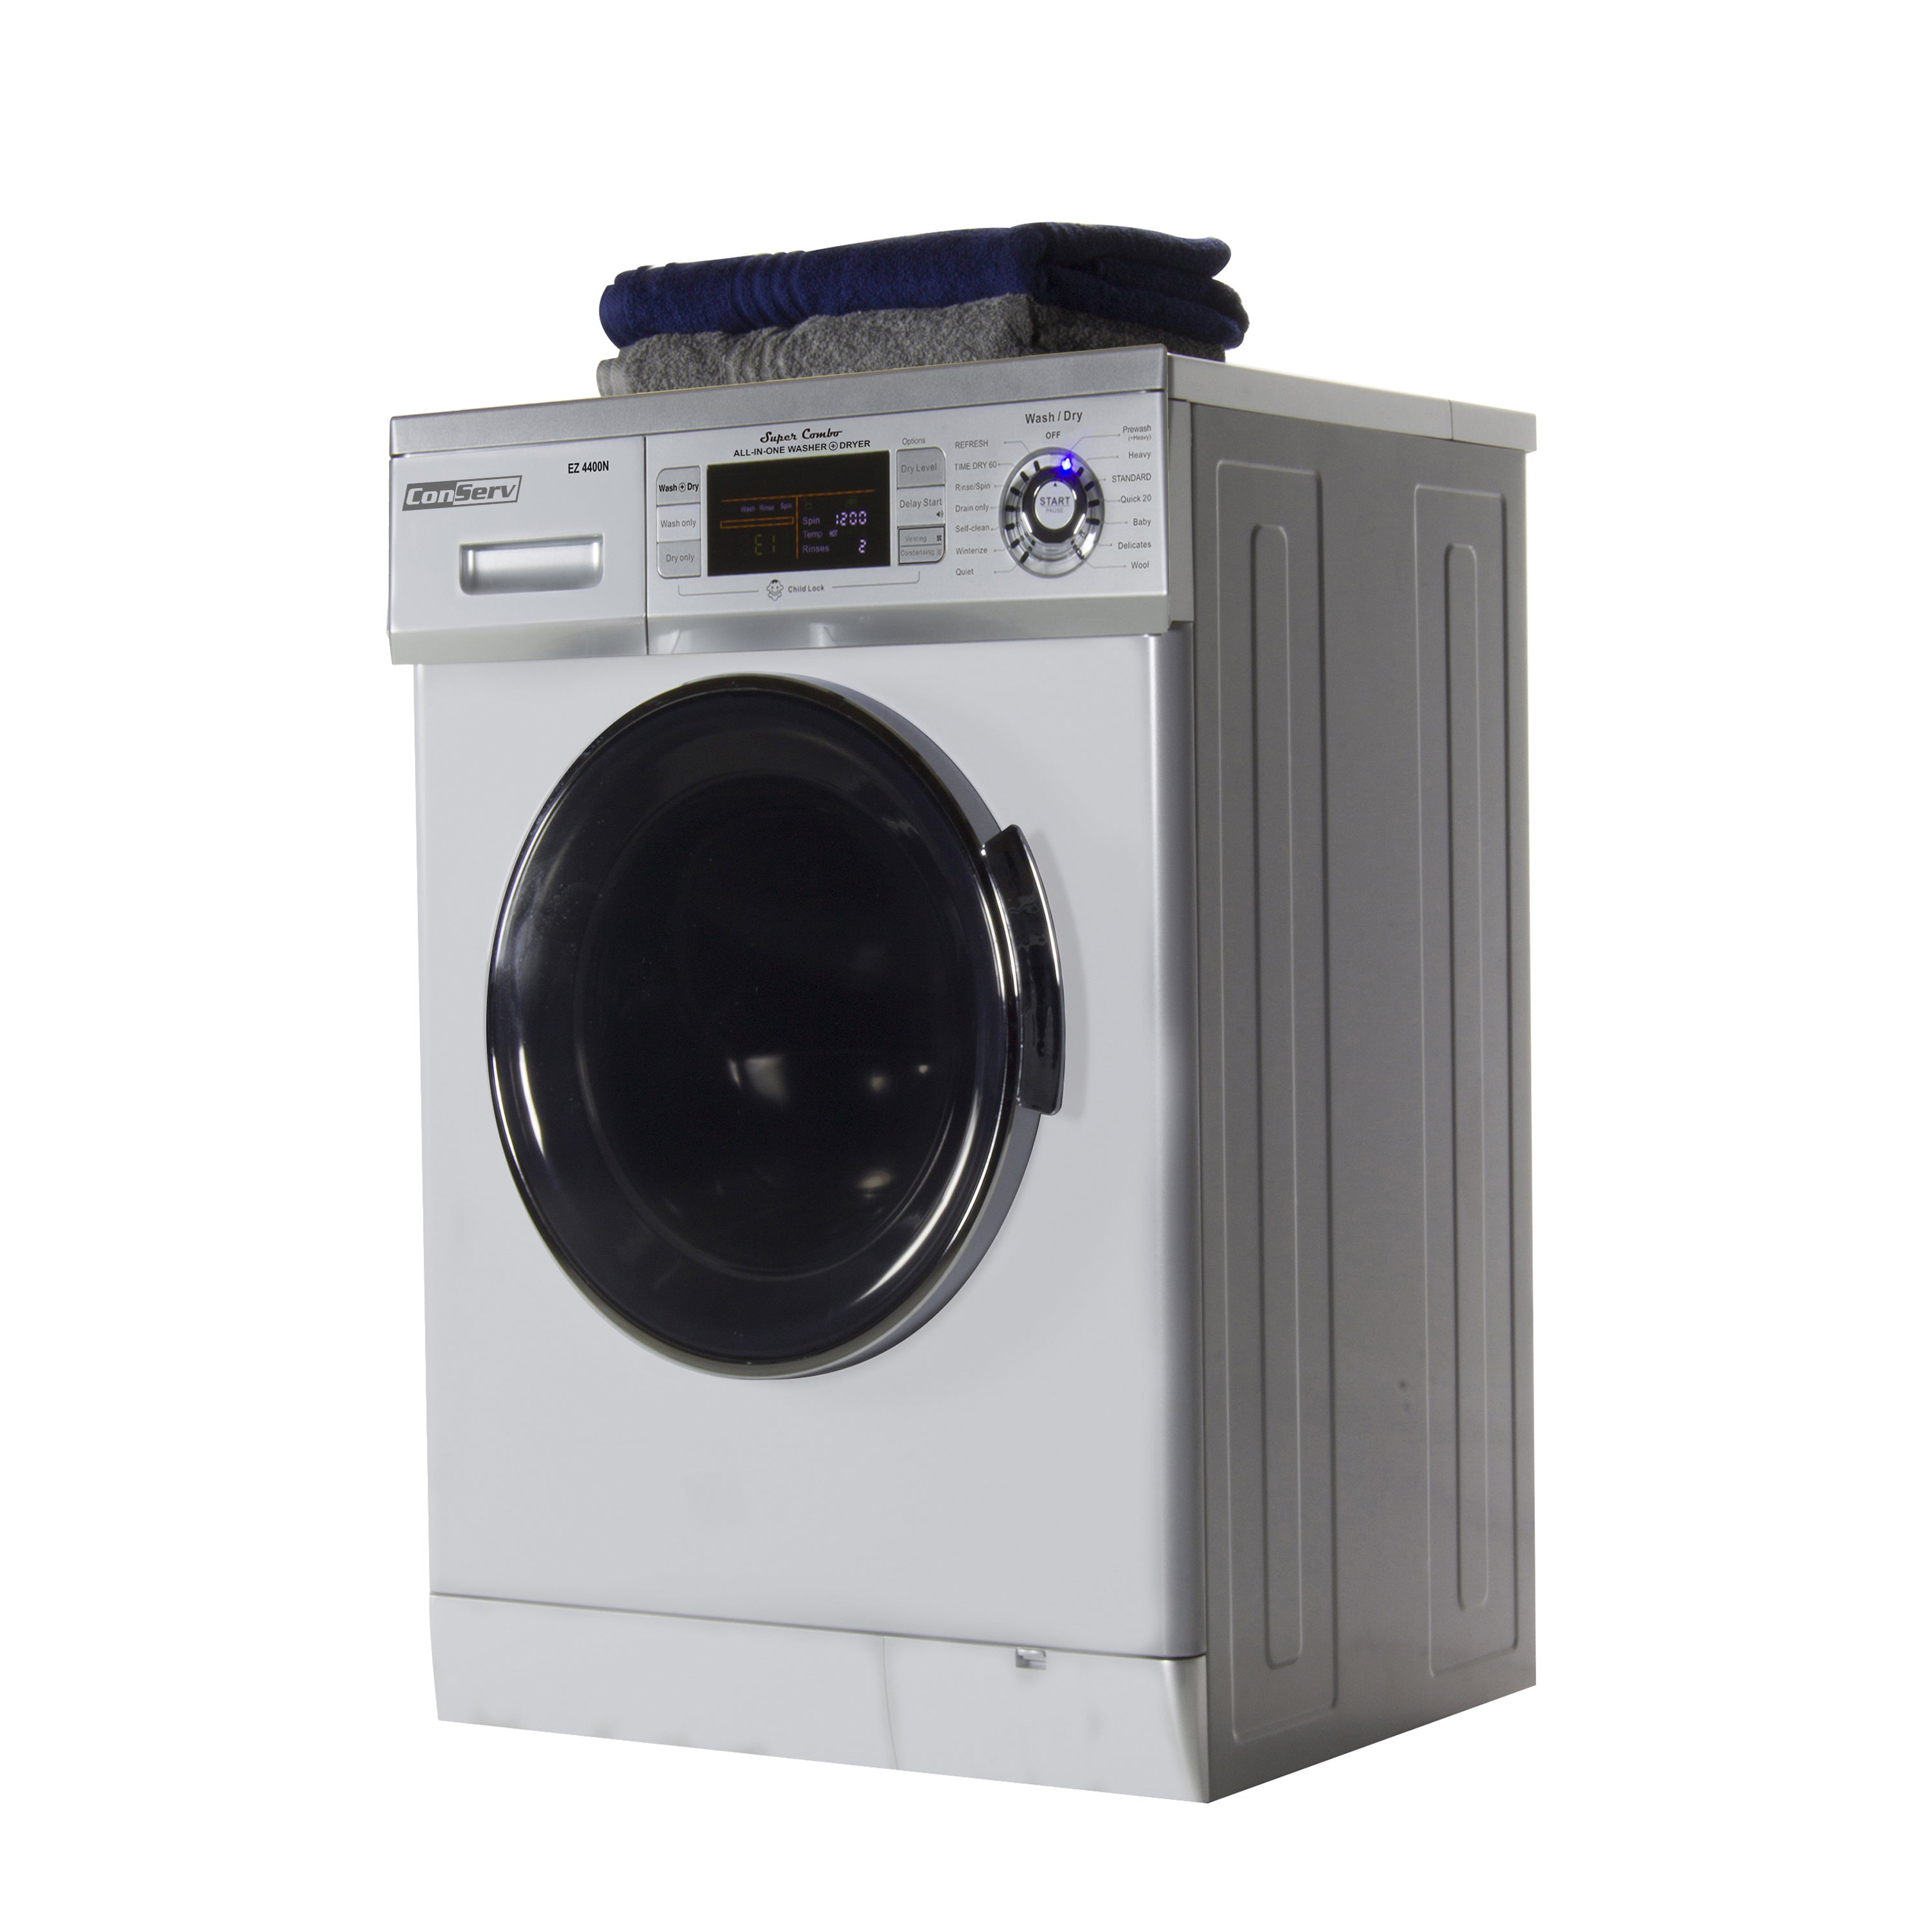 Compact 13 lbs Combination Washer DryerVented/Ventless Dry, Winterize, Quiet, Easy to Use Controls, 2020